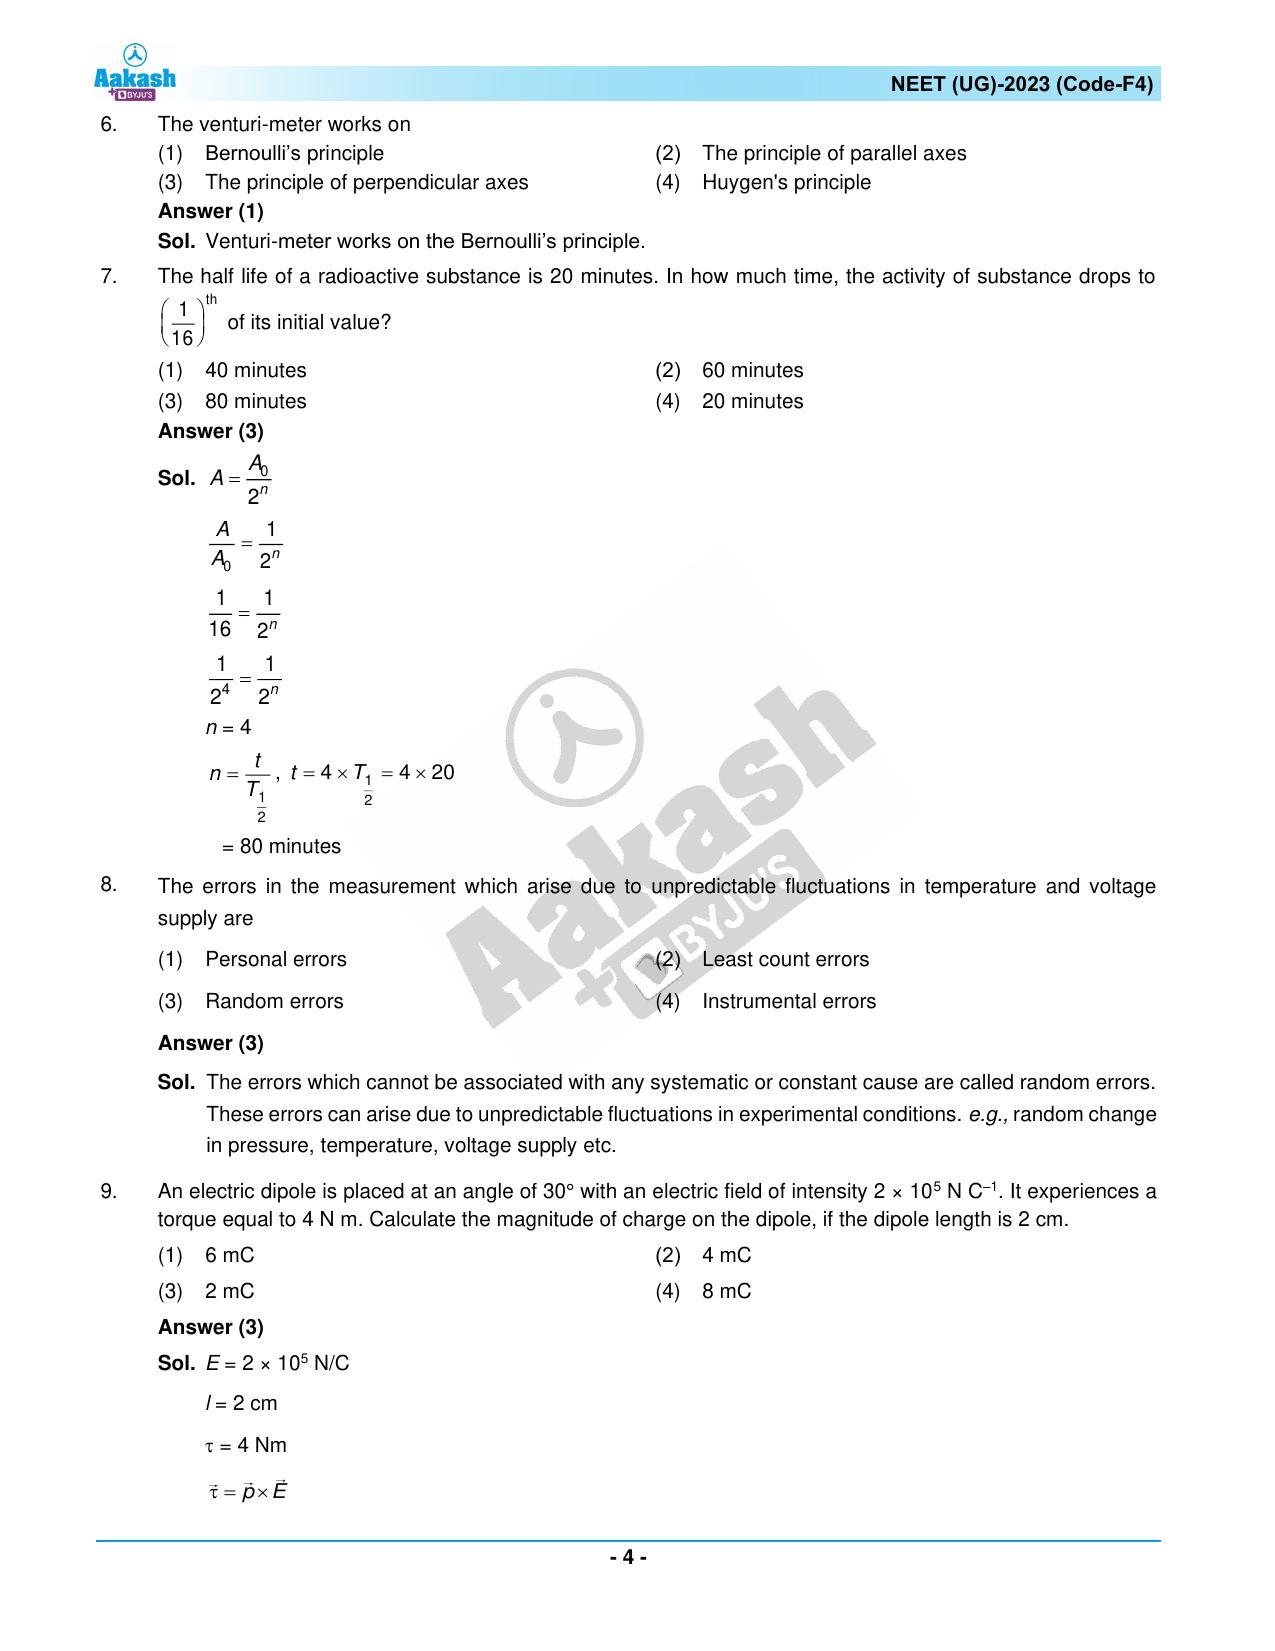 NEET 2023 Question Paper F4 - Page 4